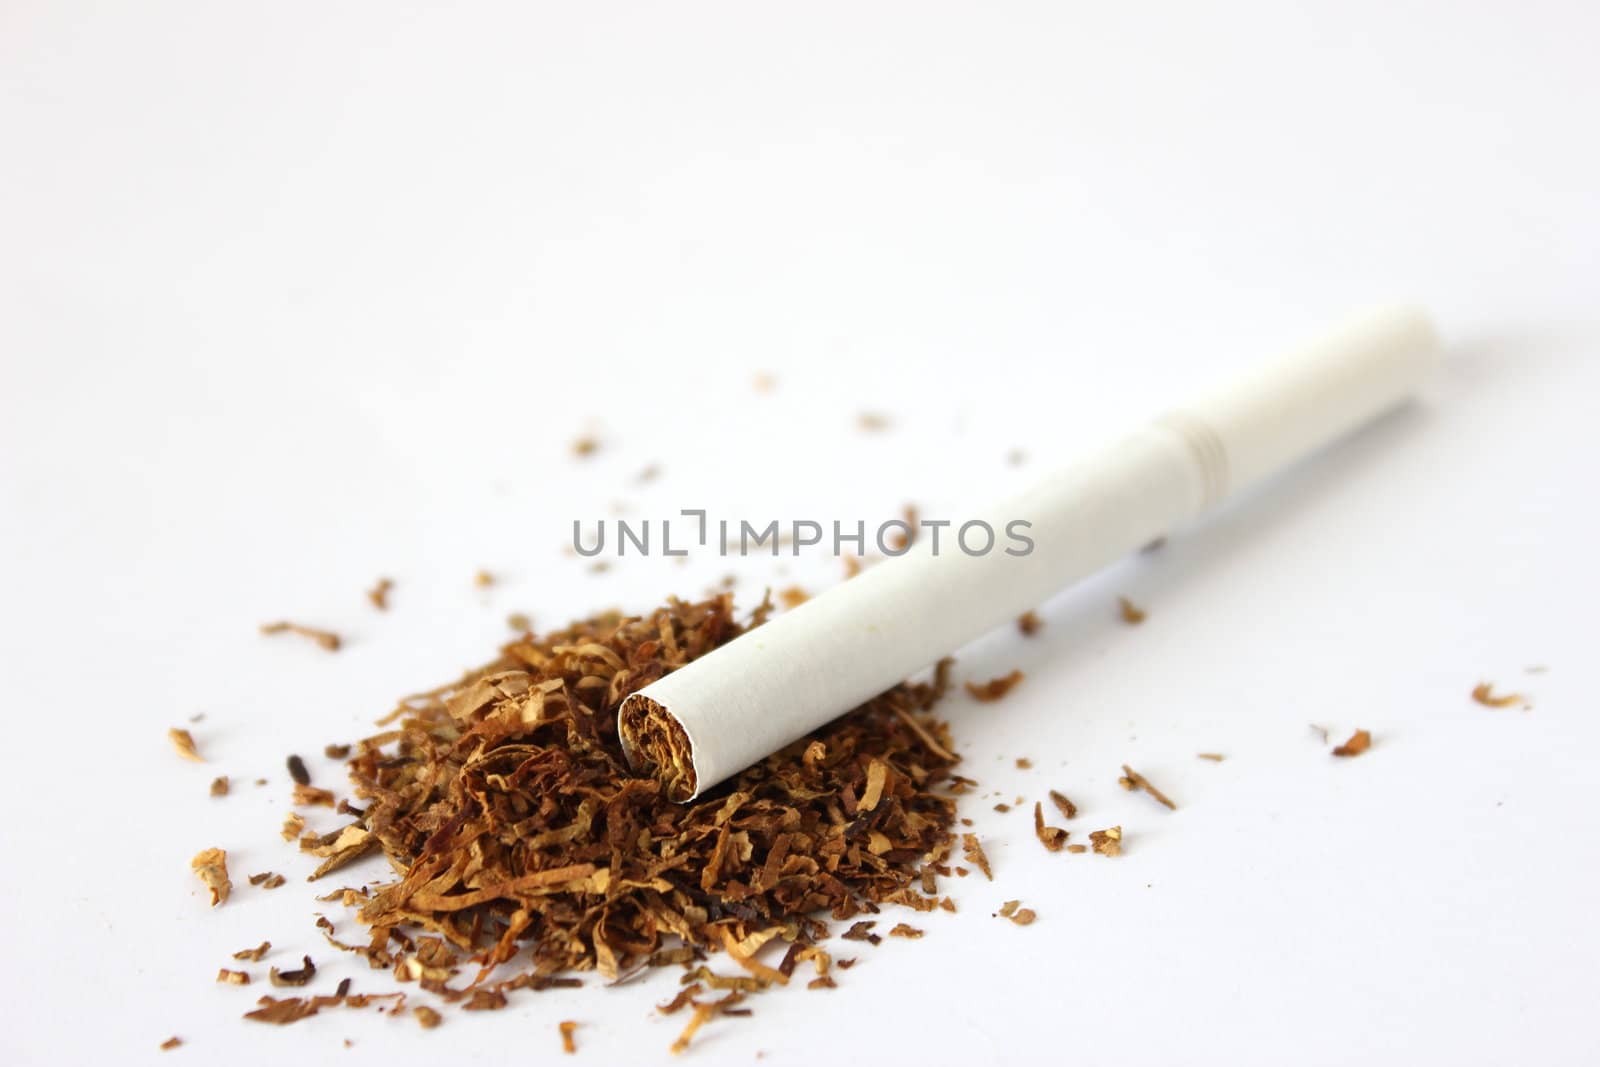 Cigarette on Tobacco by abhbah05